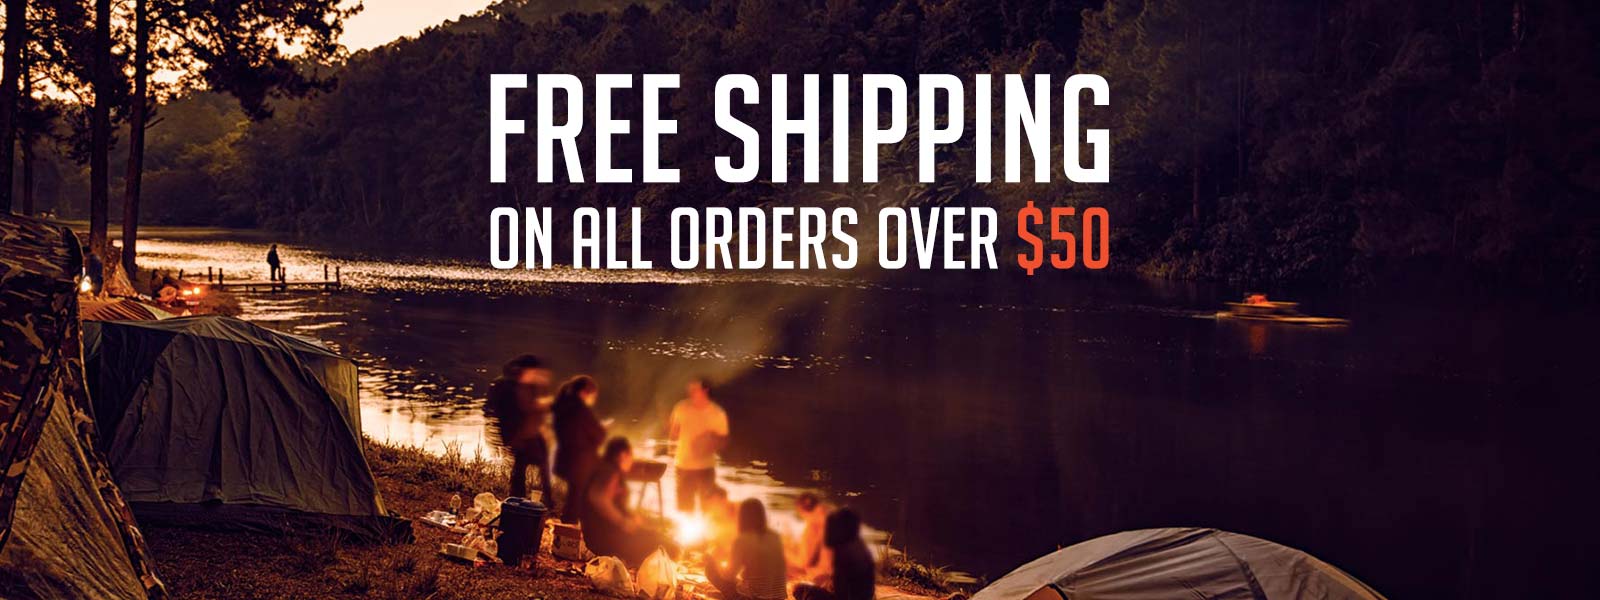 free shippping over $50